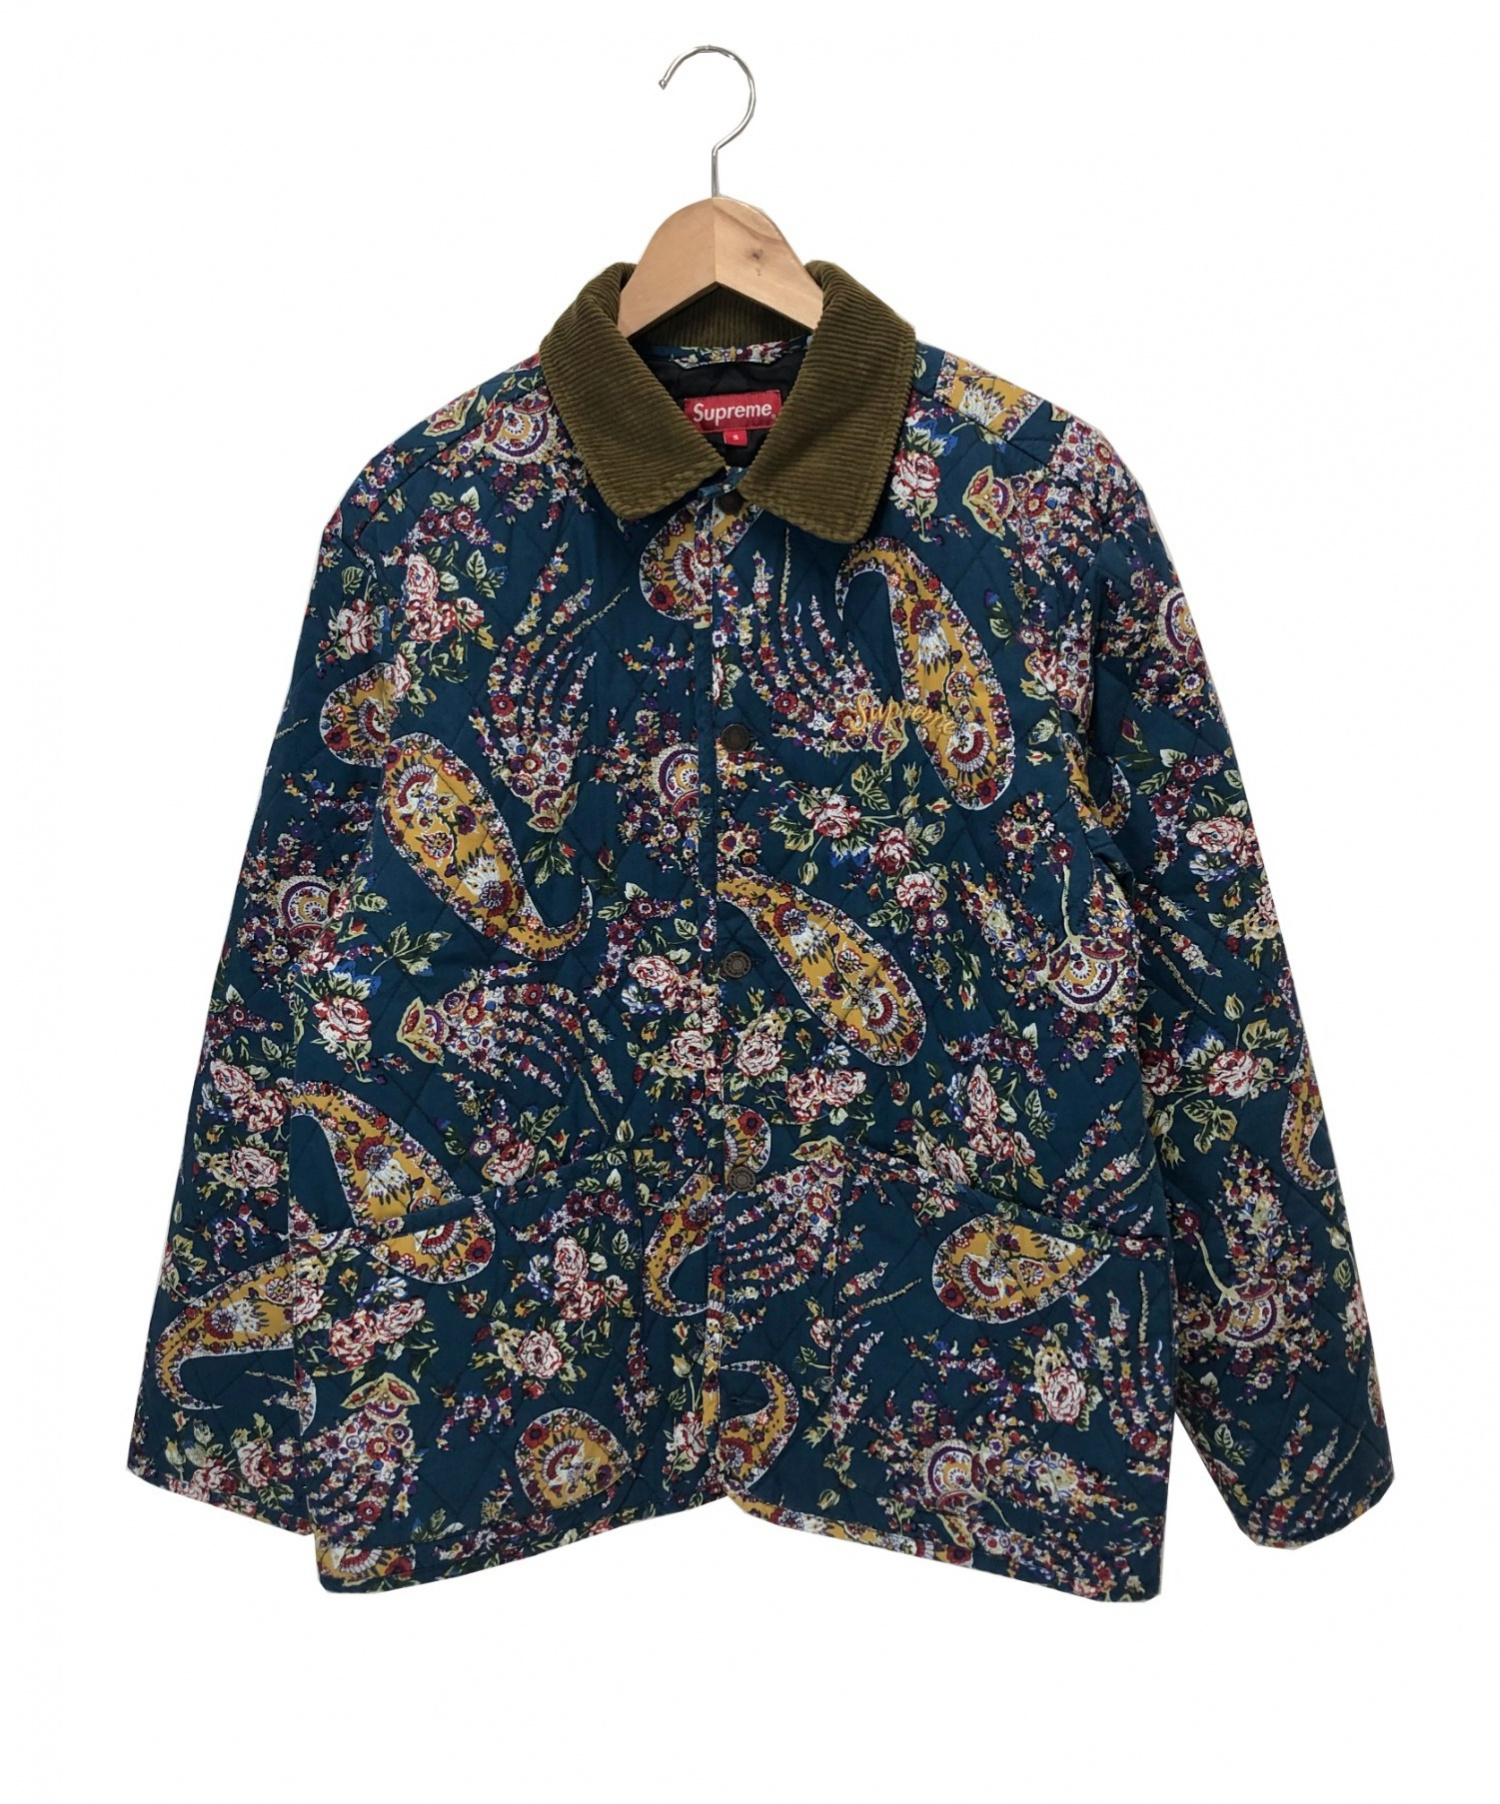 Supreme Quilted Paisley Jacket : Supreme - 新品 19AW Supreme Quilted